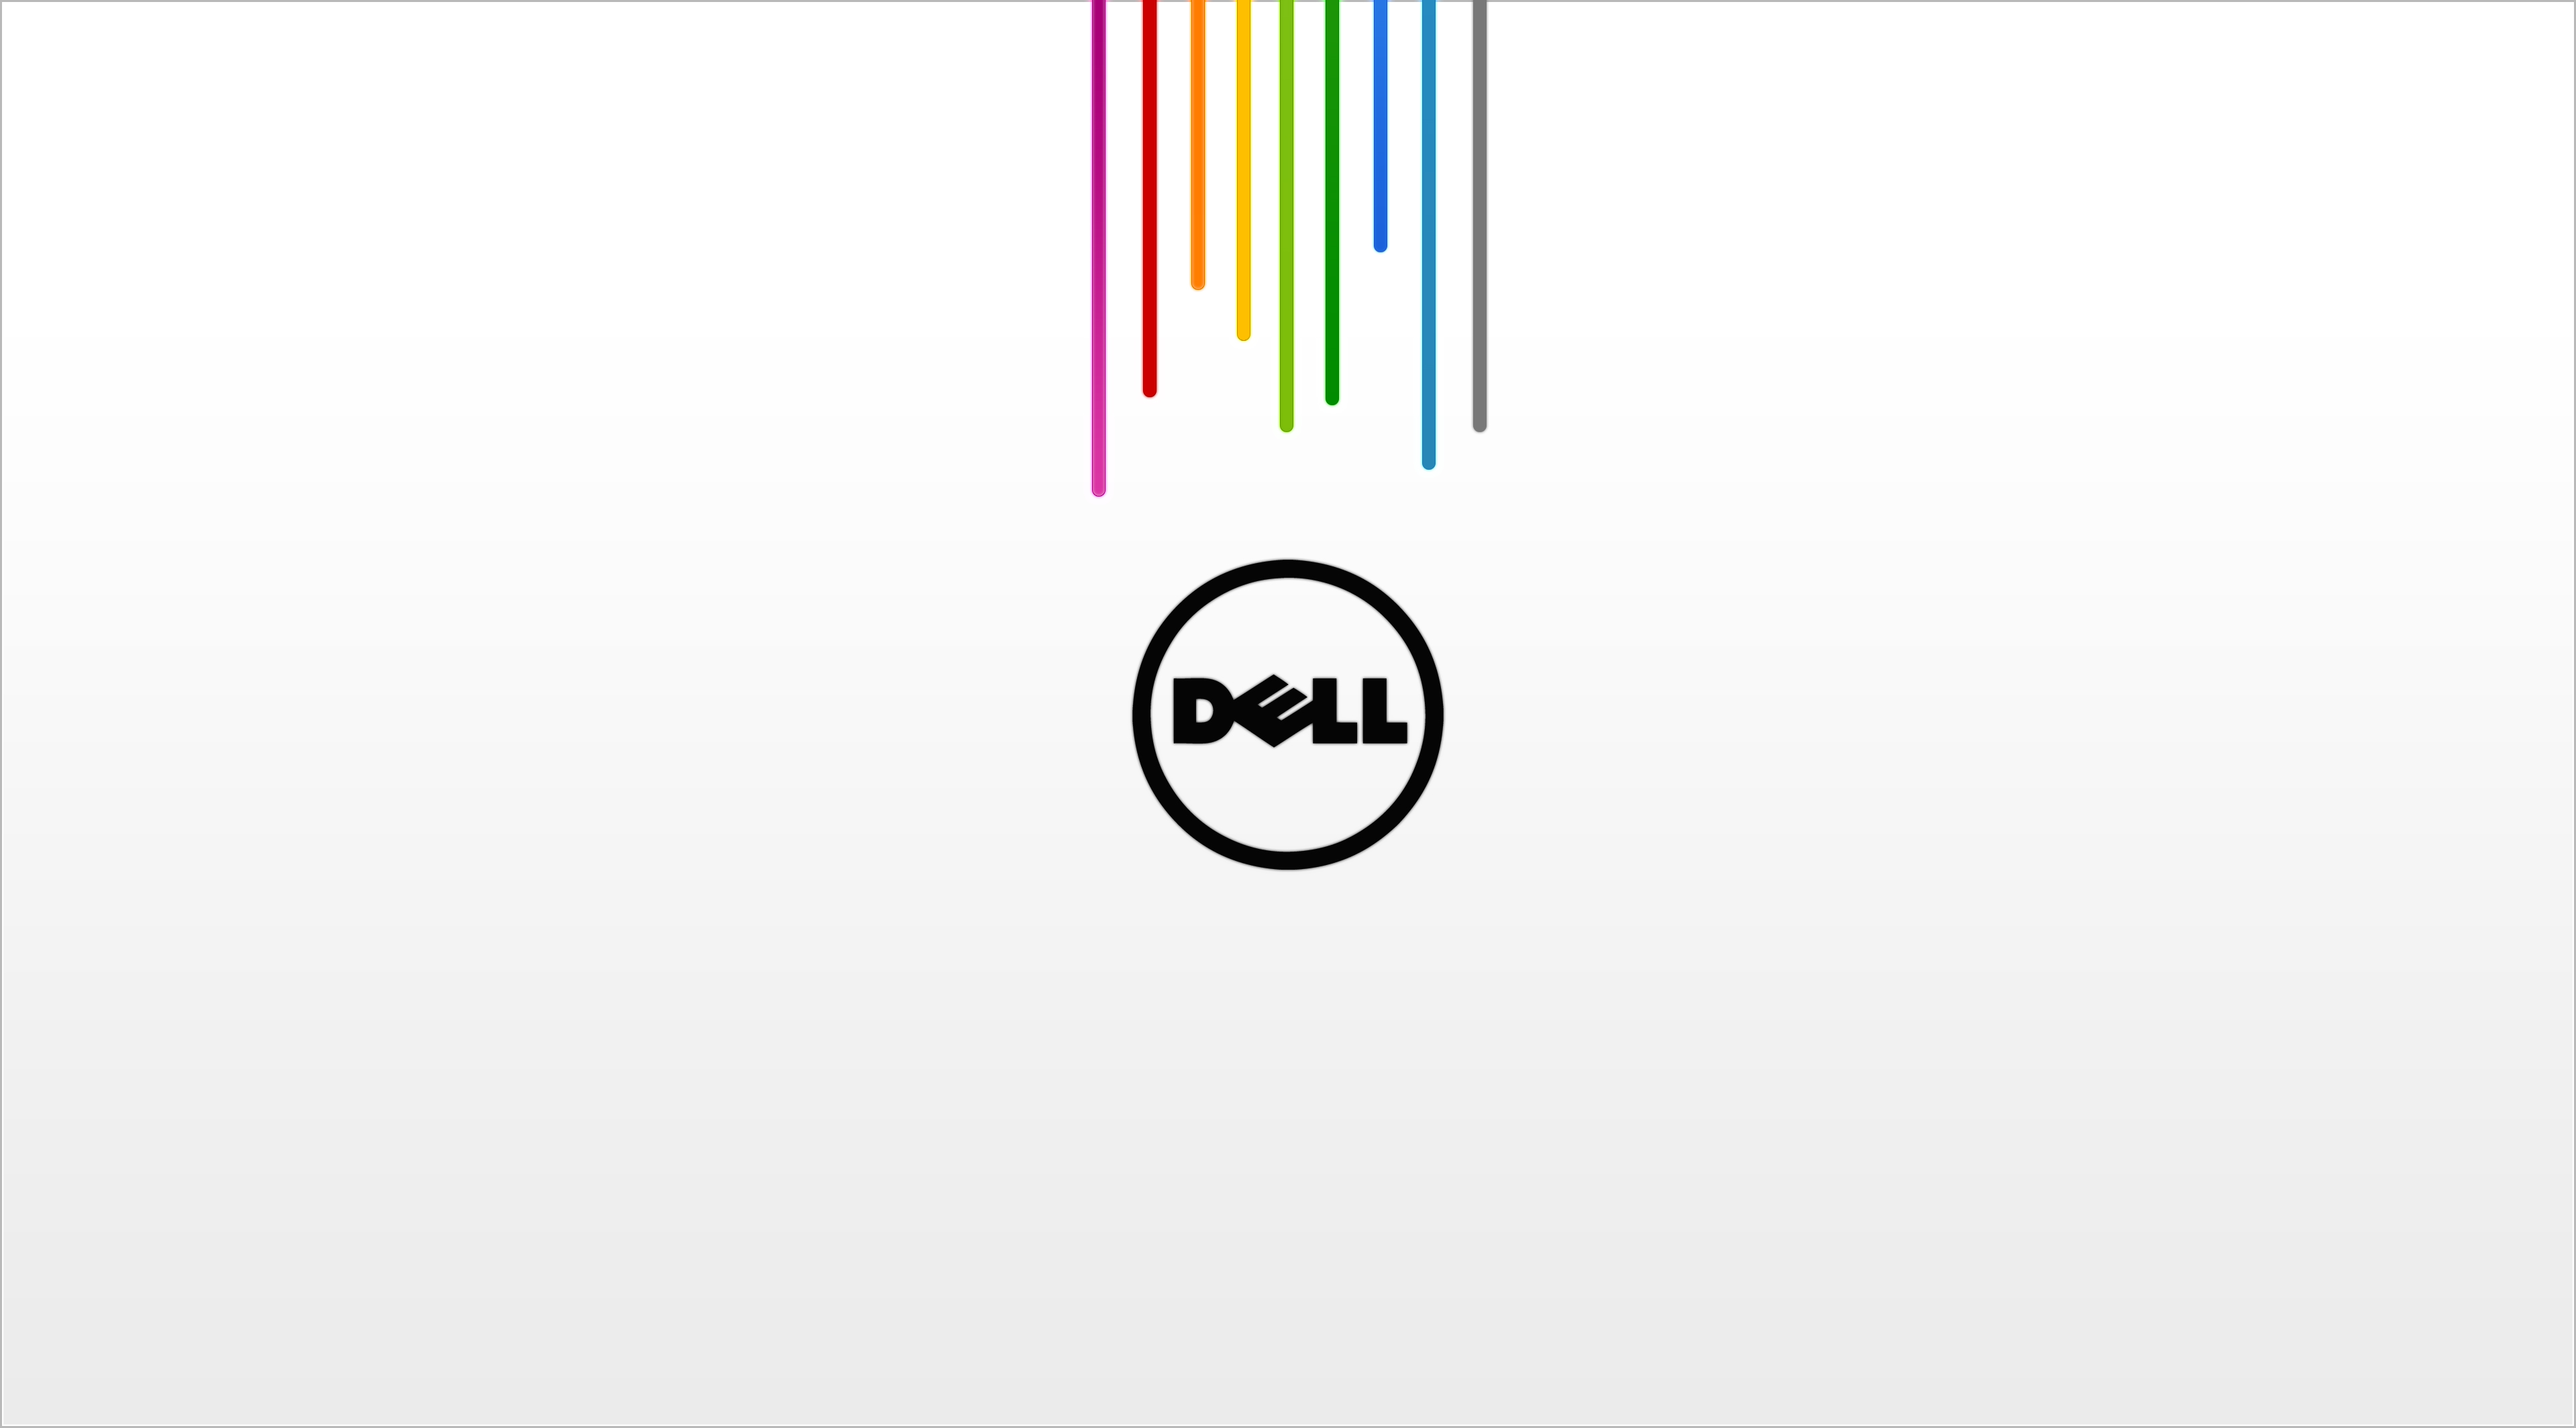 Technology Dell 3840x2128